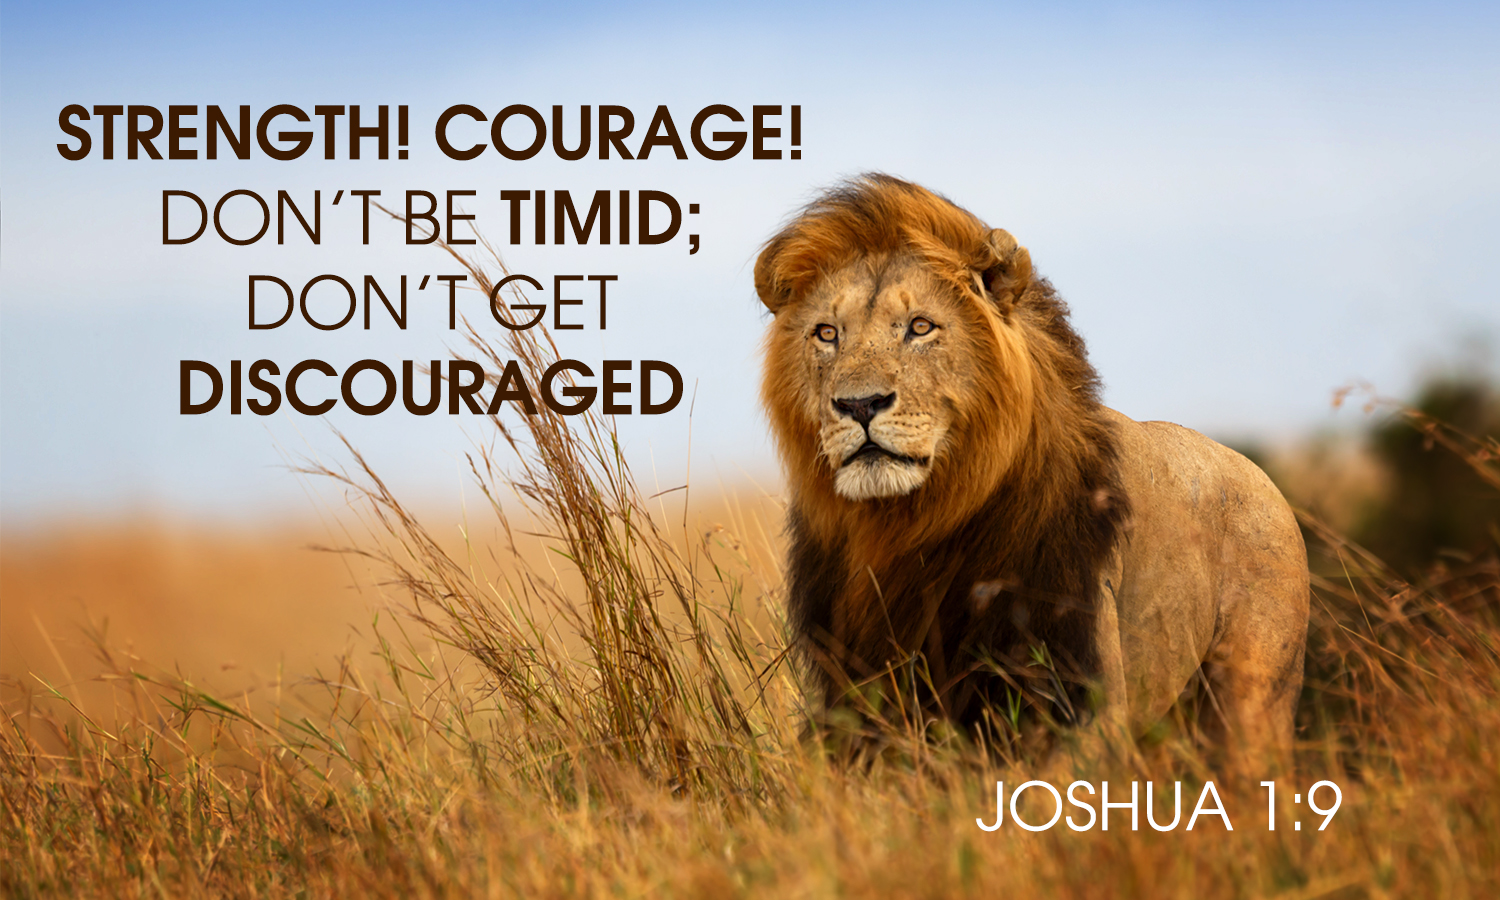 Joshua 1:9 Strength! Courage! Don’t be timid; don’t get discouraged.